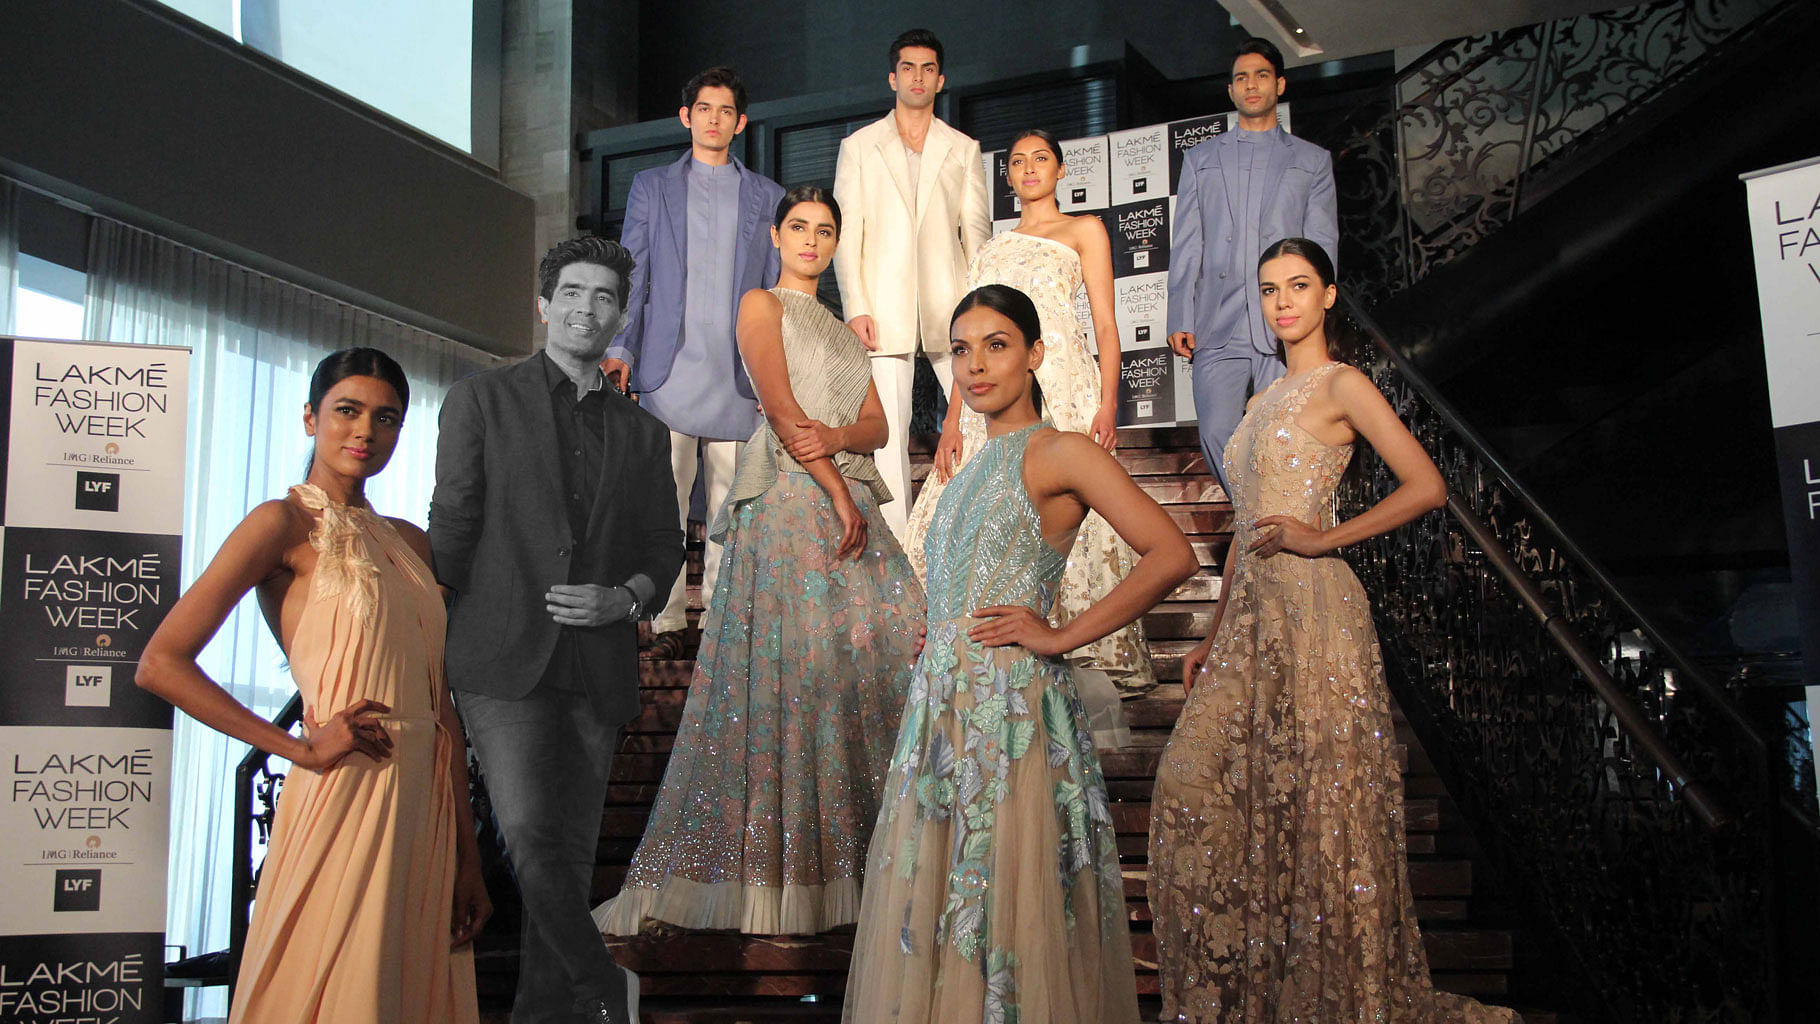 Manish Malhotra poses with the models wearing his preview collection for Lakmé Fashion Week 2016 (Photo: Yogen Shah)